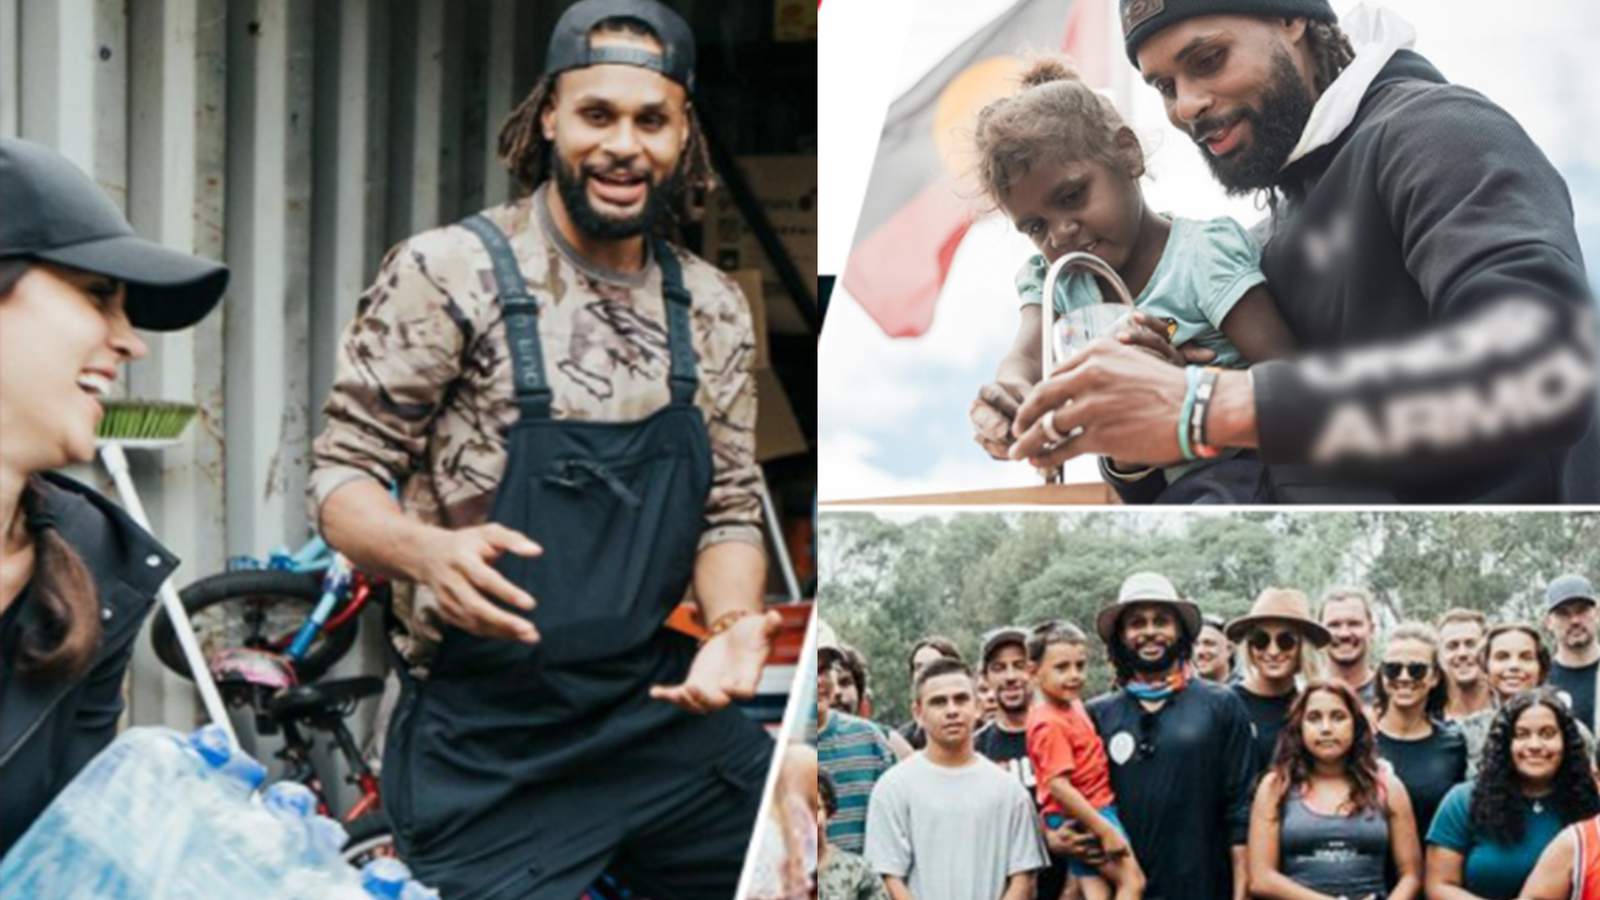 Patty Mills honored for social justice initiatives for Indigenous people of Australia